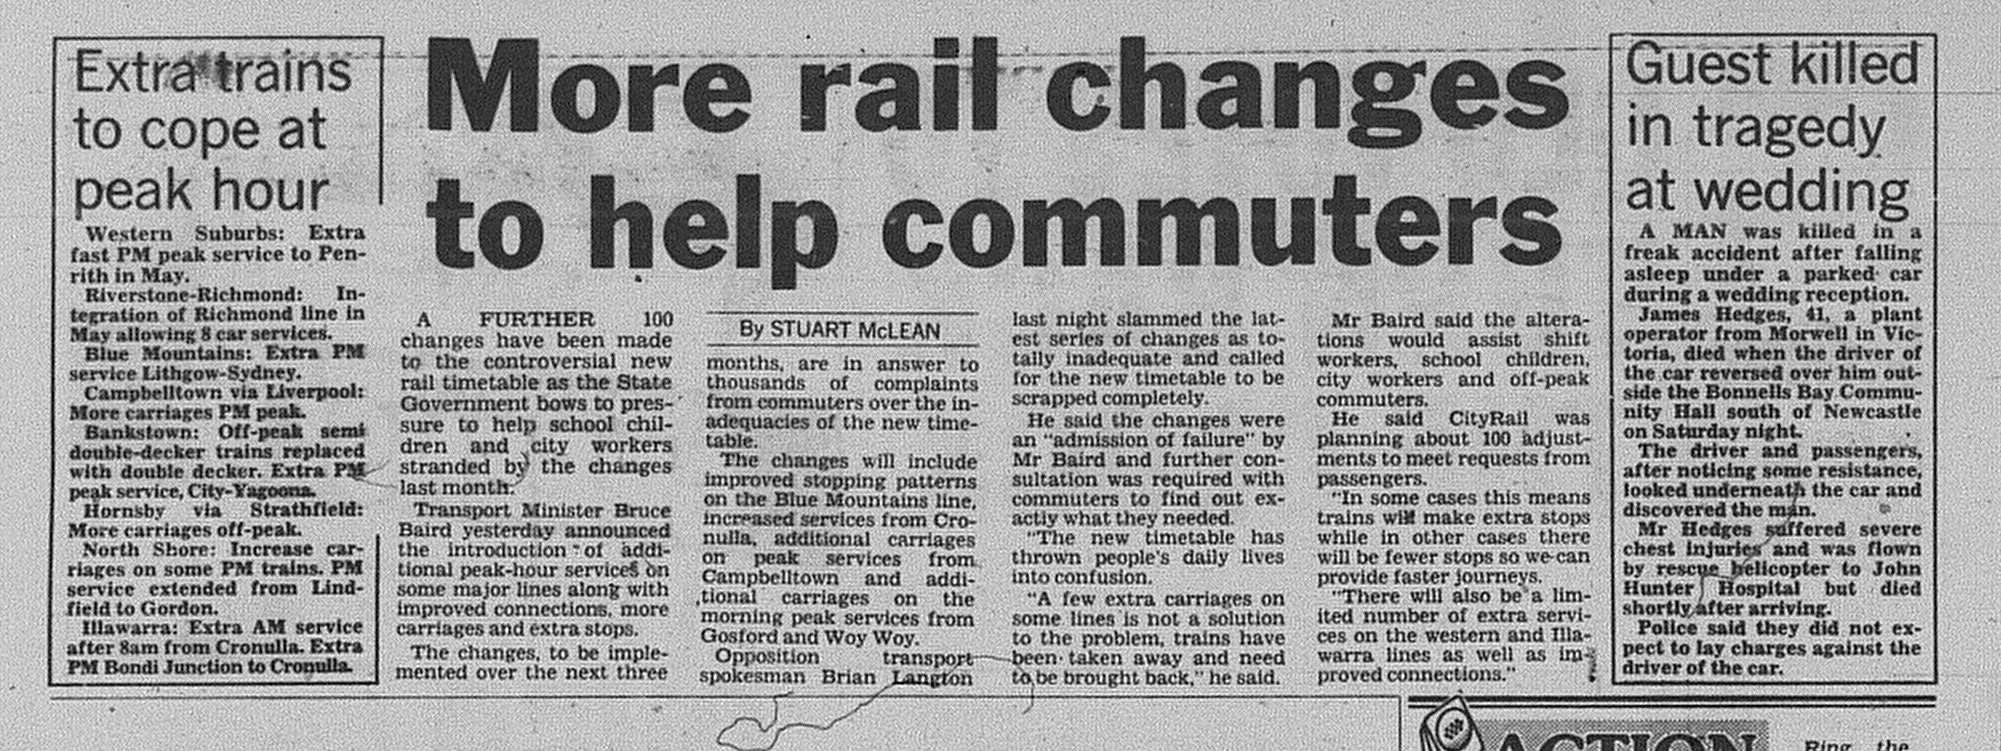 Rail timetable changes February 24 1992 daily telegraph 18